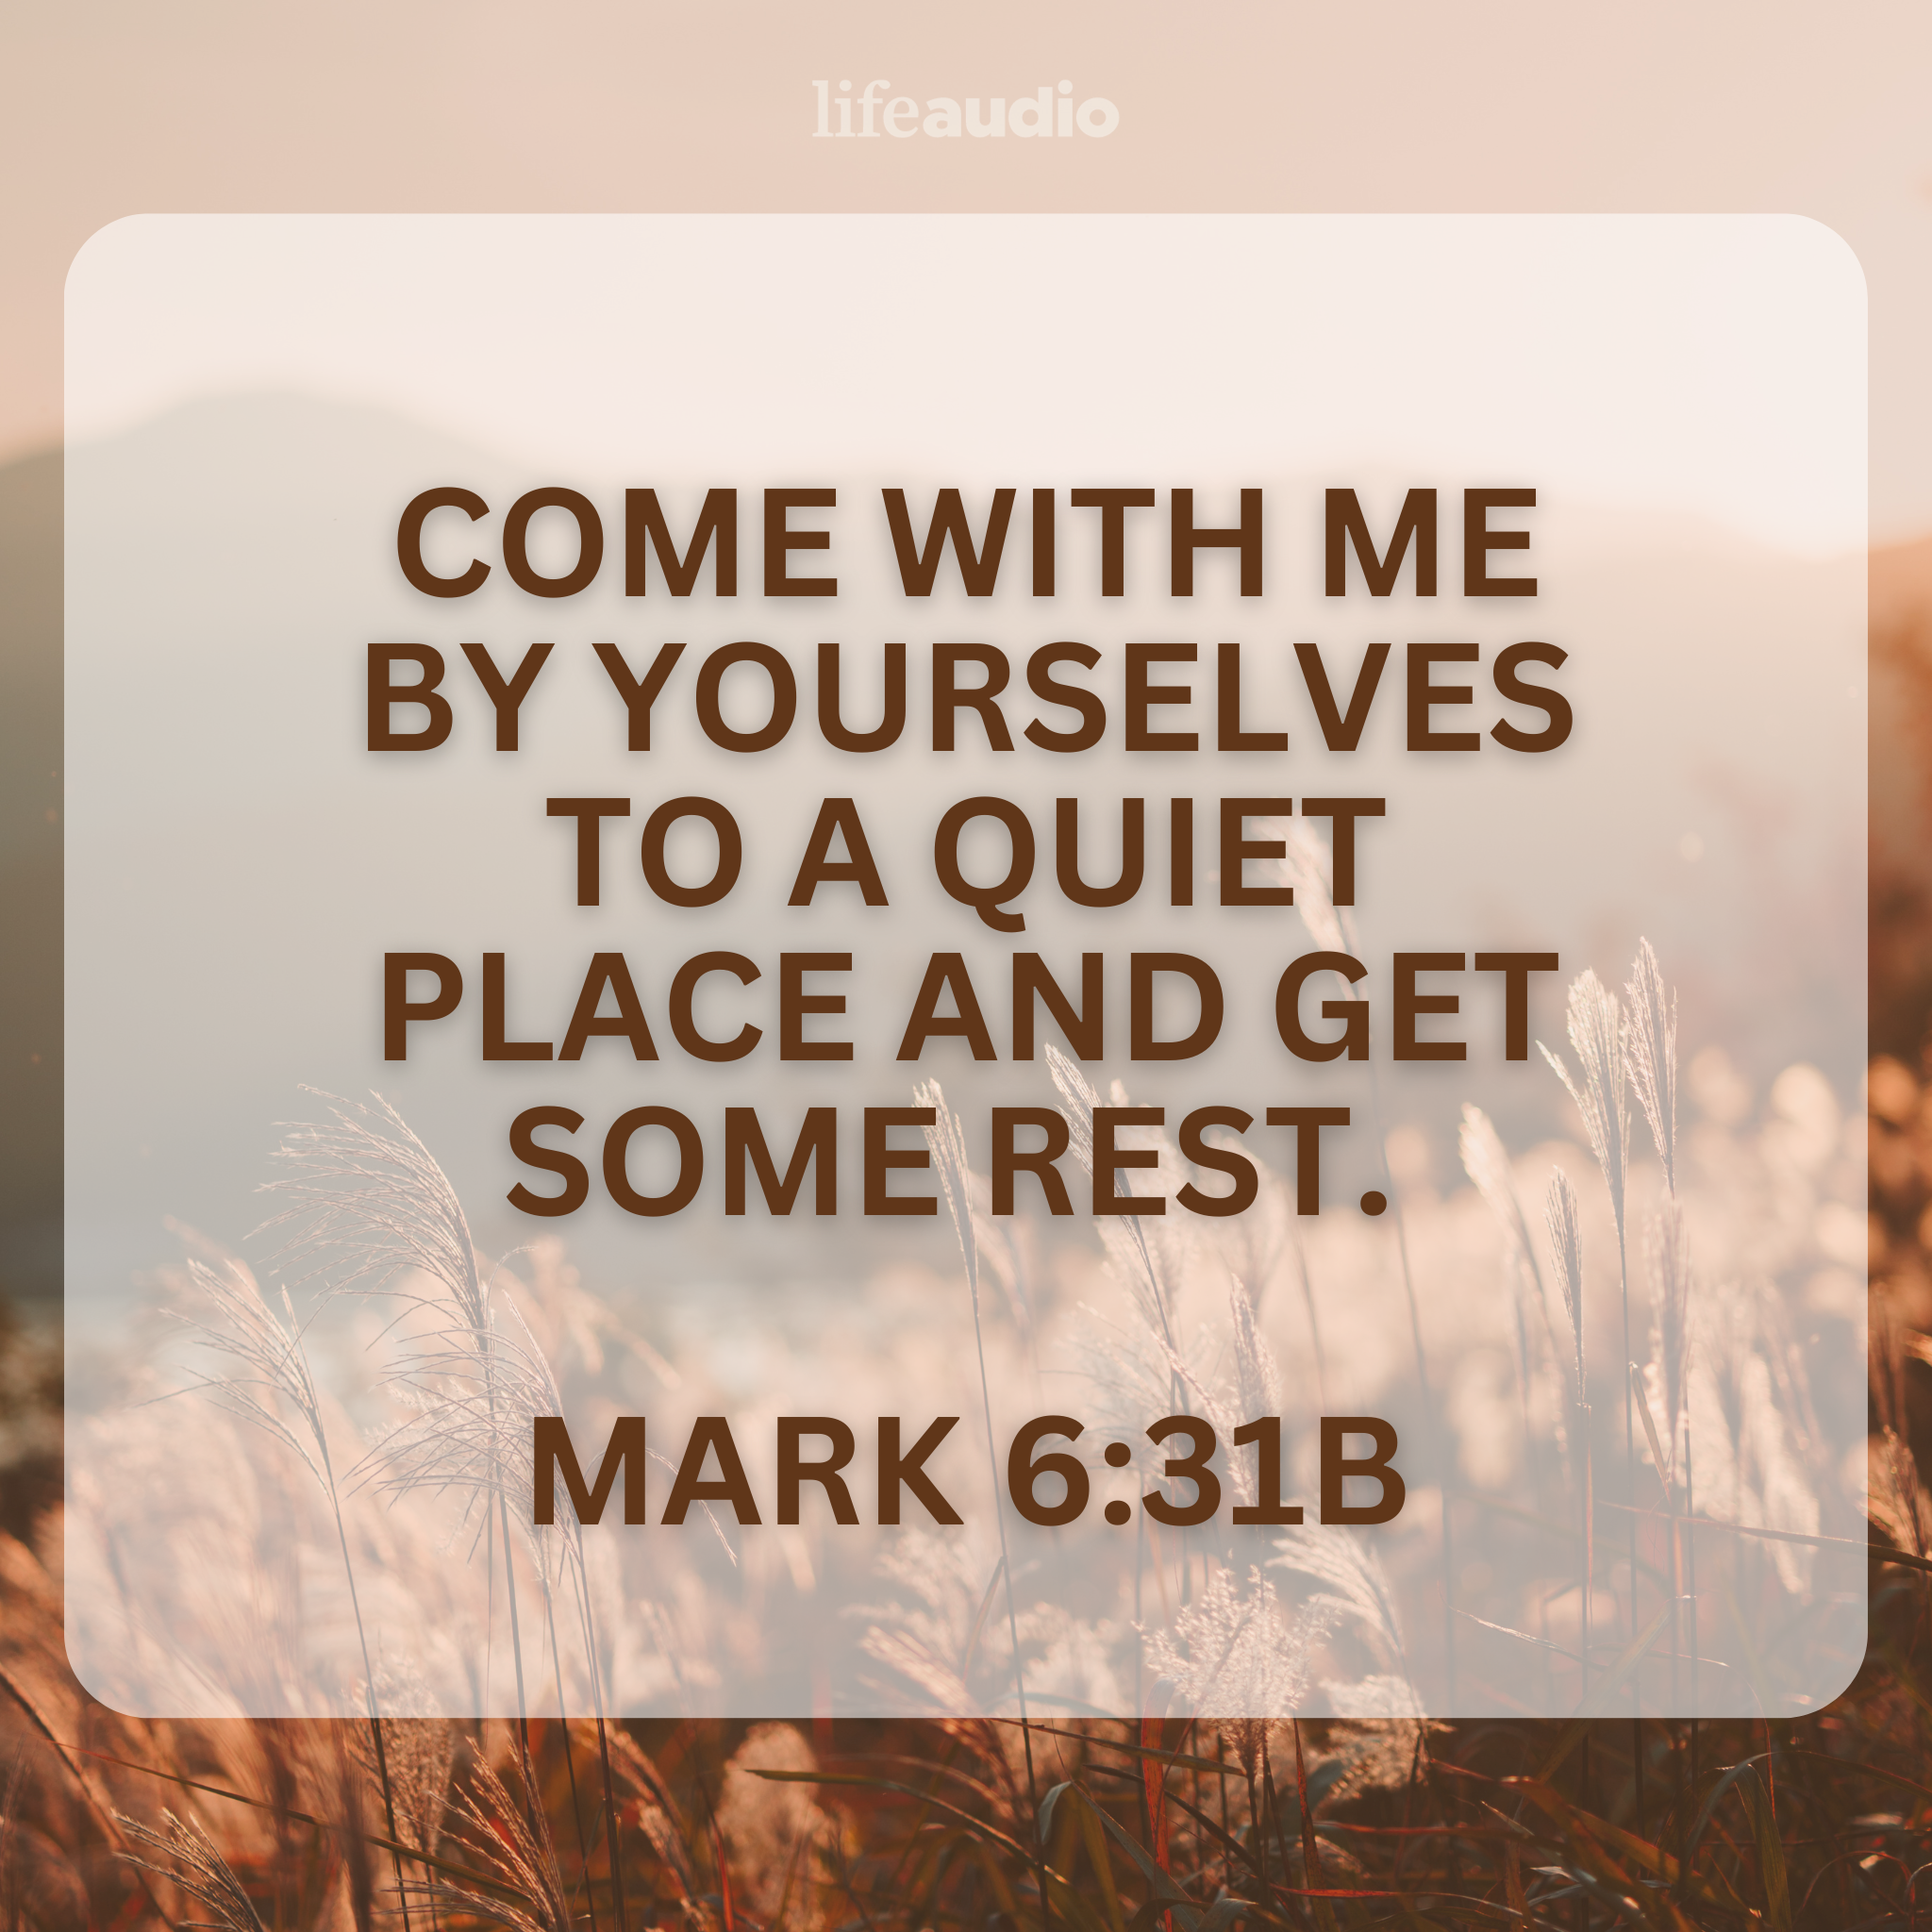 What Is the Difference Between Solitude and Isolation? (Mark 6:31)